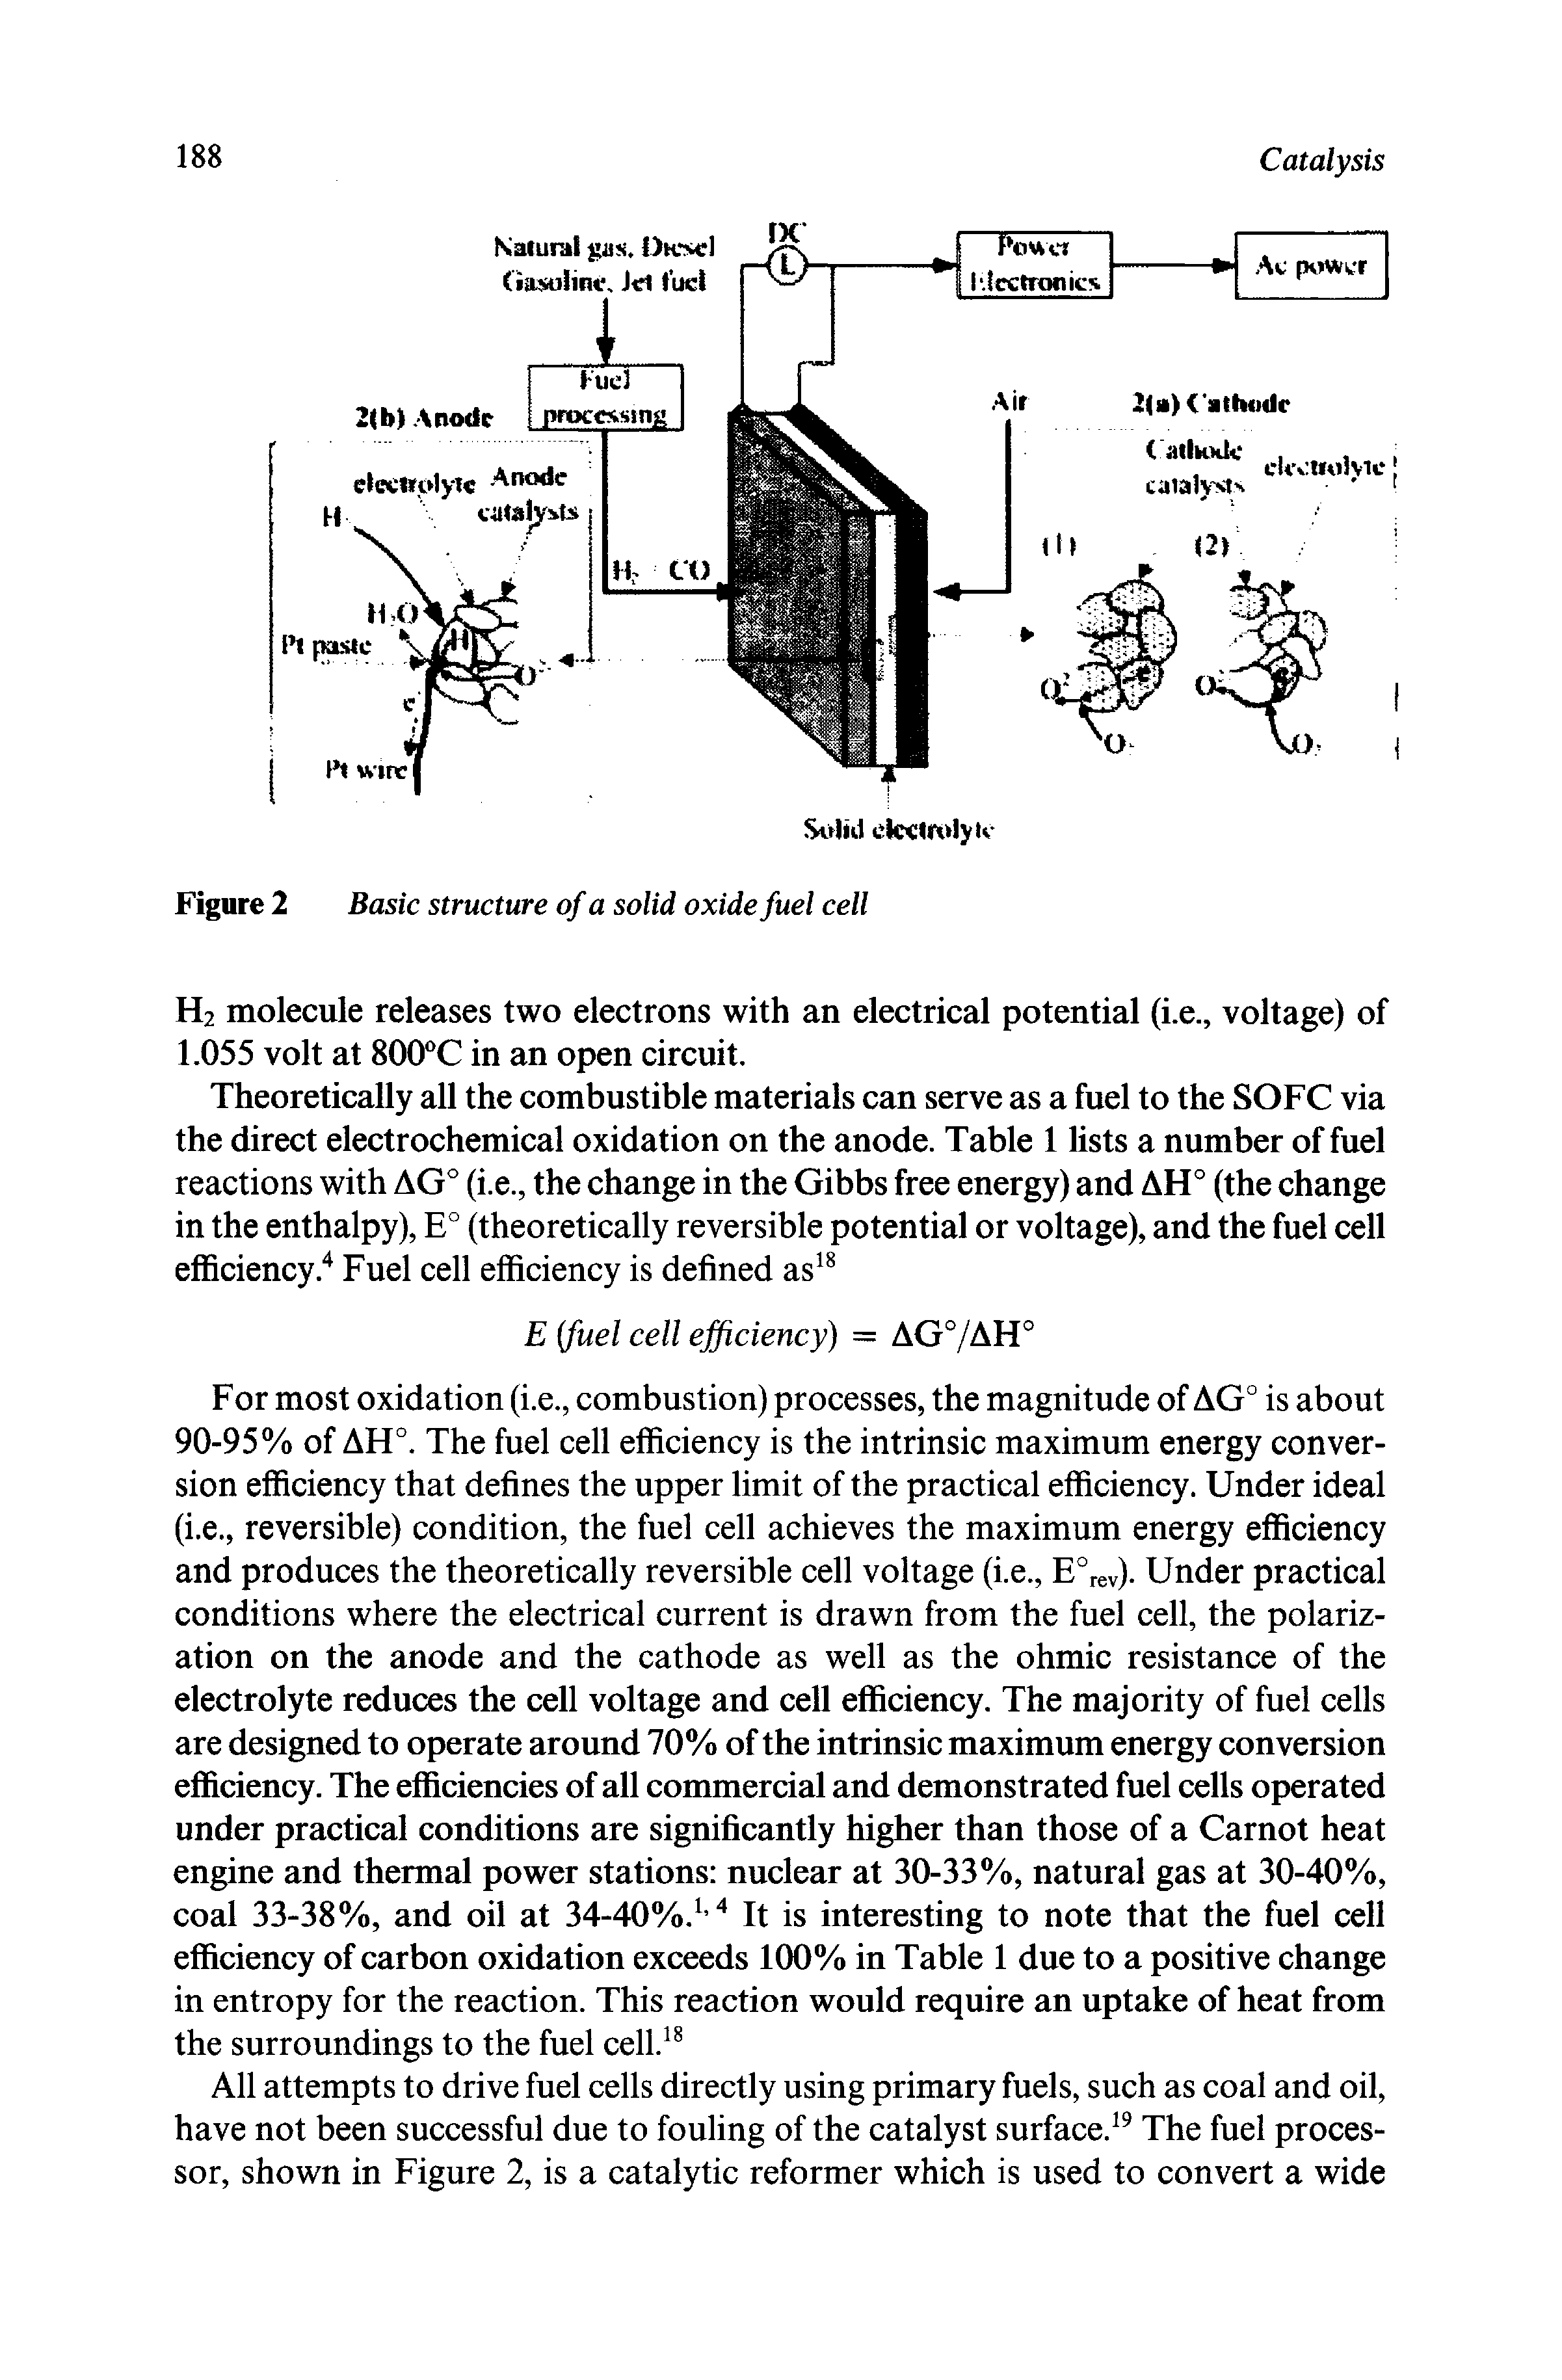 Figure 2 Basic structure of a solid oxide fuel cell...